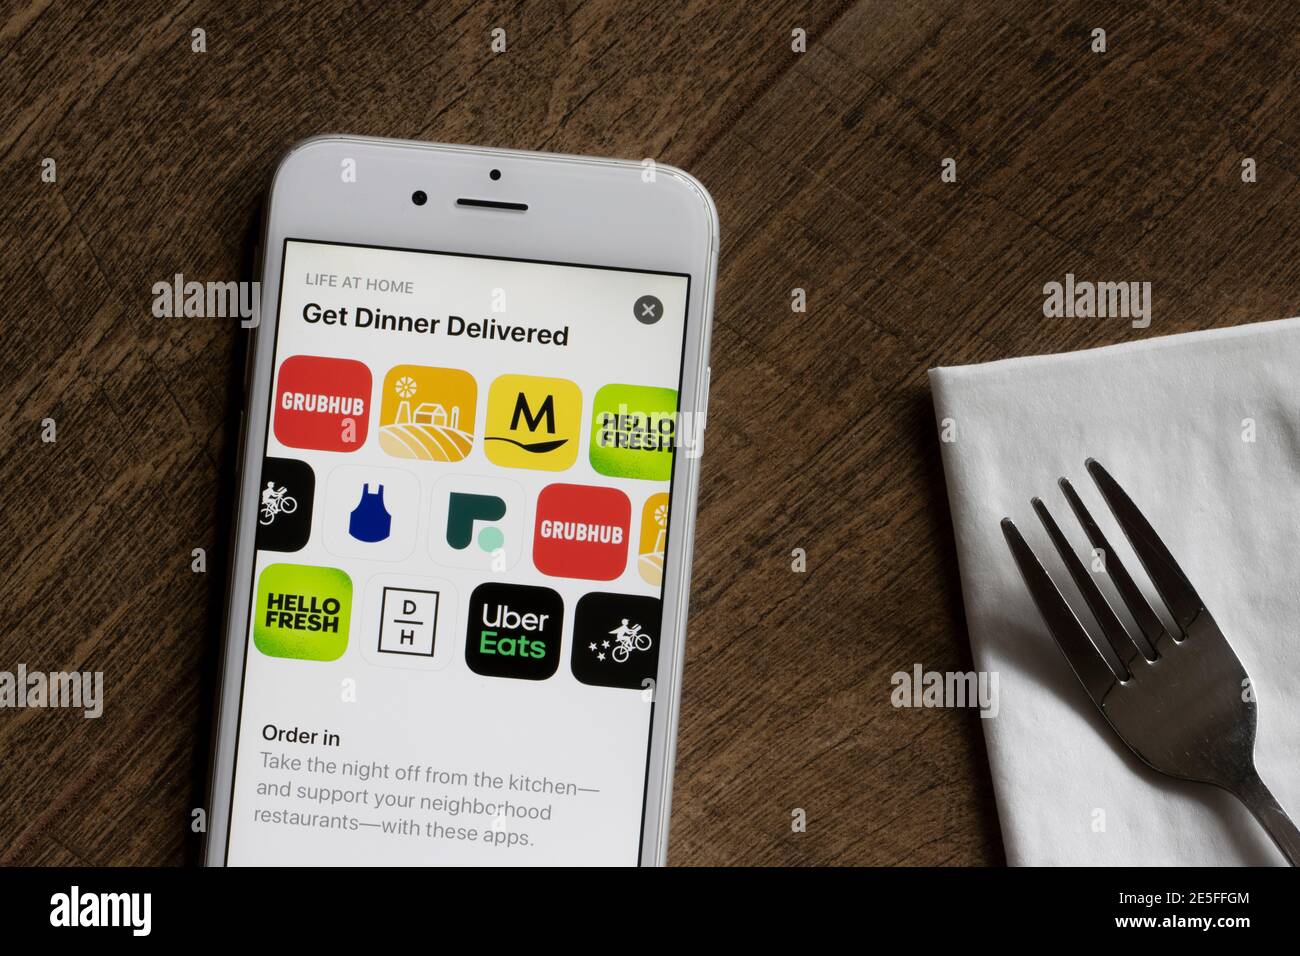 Assorted food delivery apps are seen on an iPhone - Grubhub, Uber Eats, Postmates, Freshly, Daily Harvest, HelloFresh, Blue Apron, and etc. Stock Photo